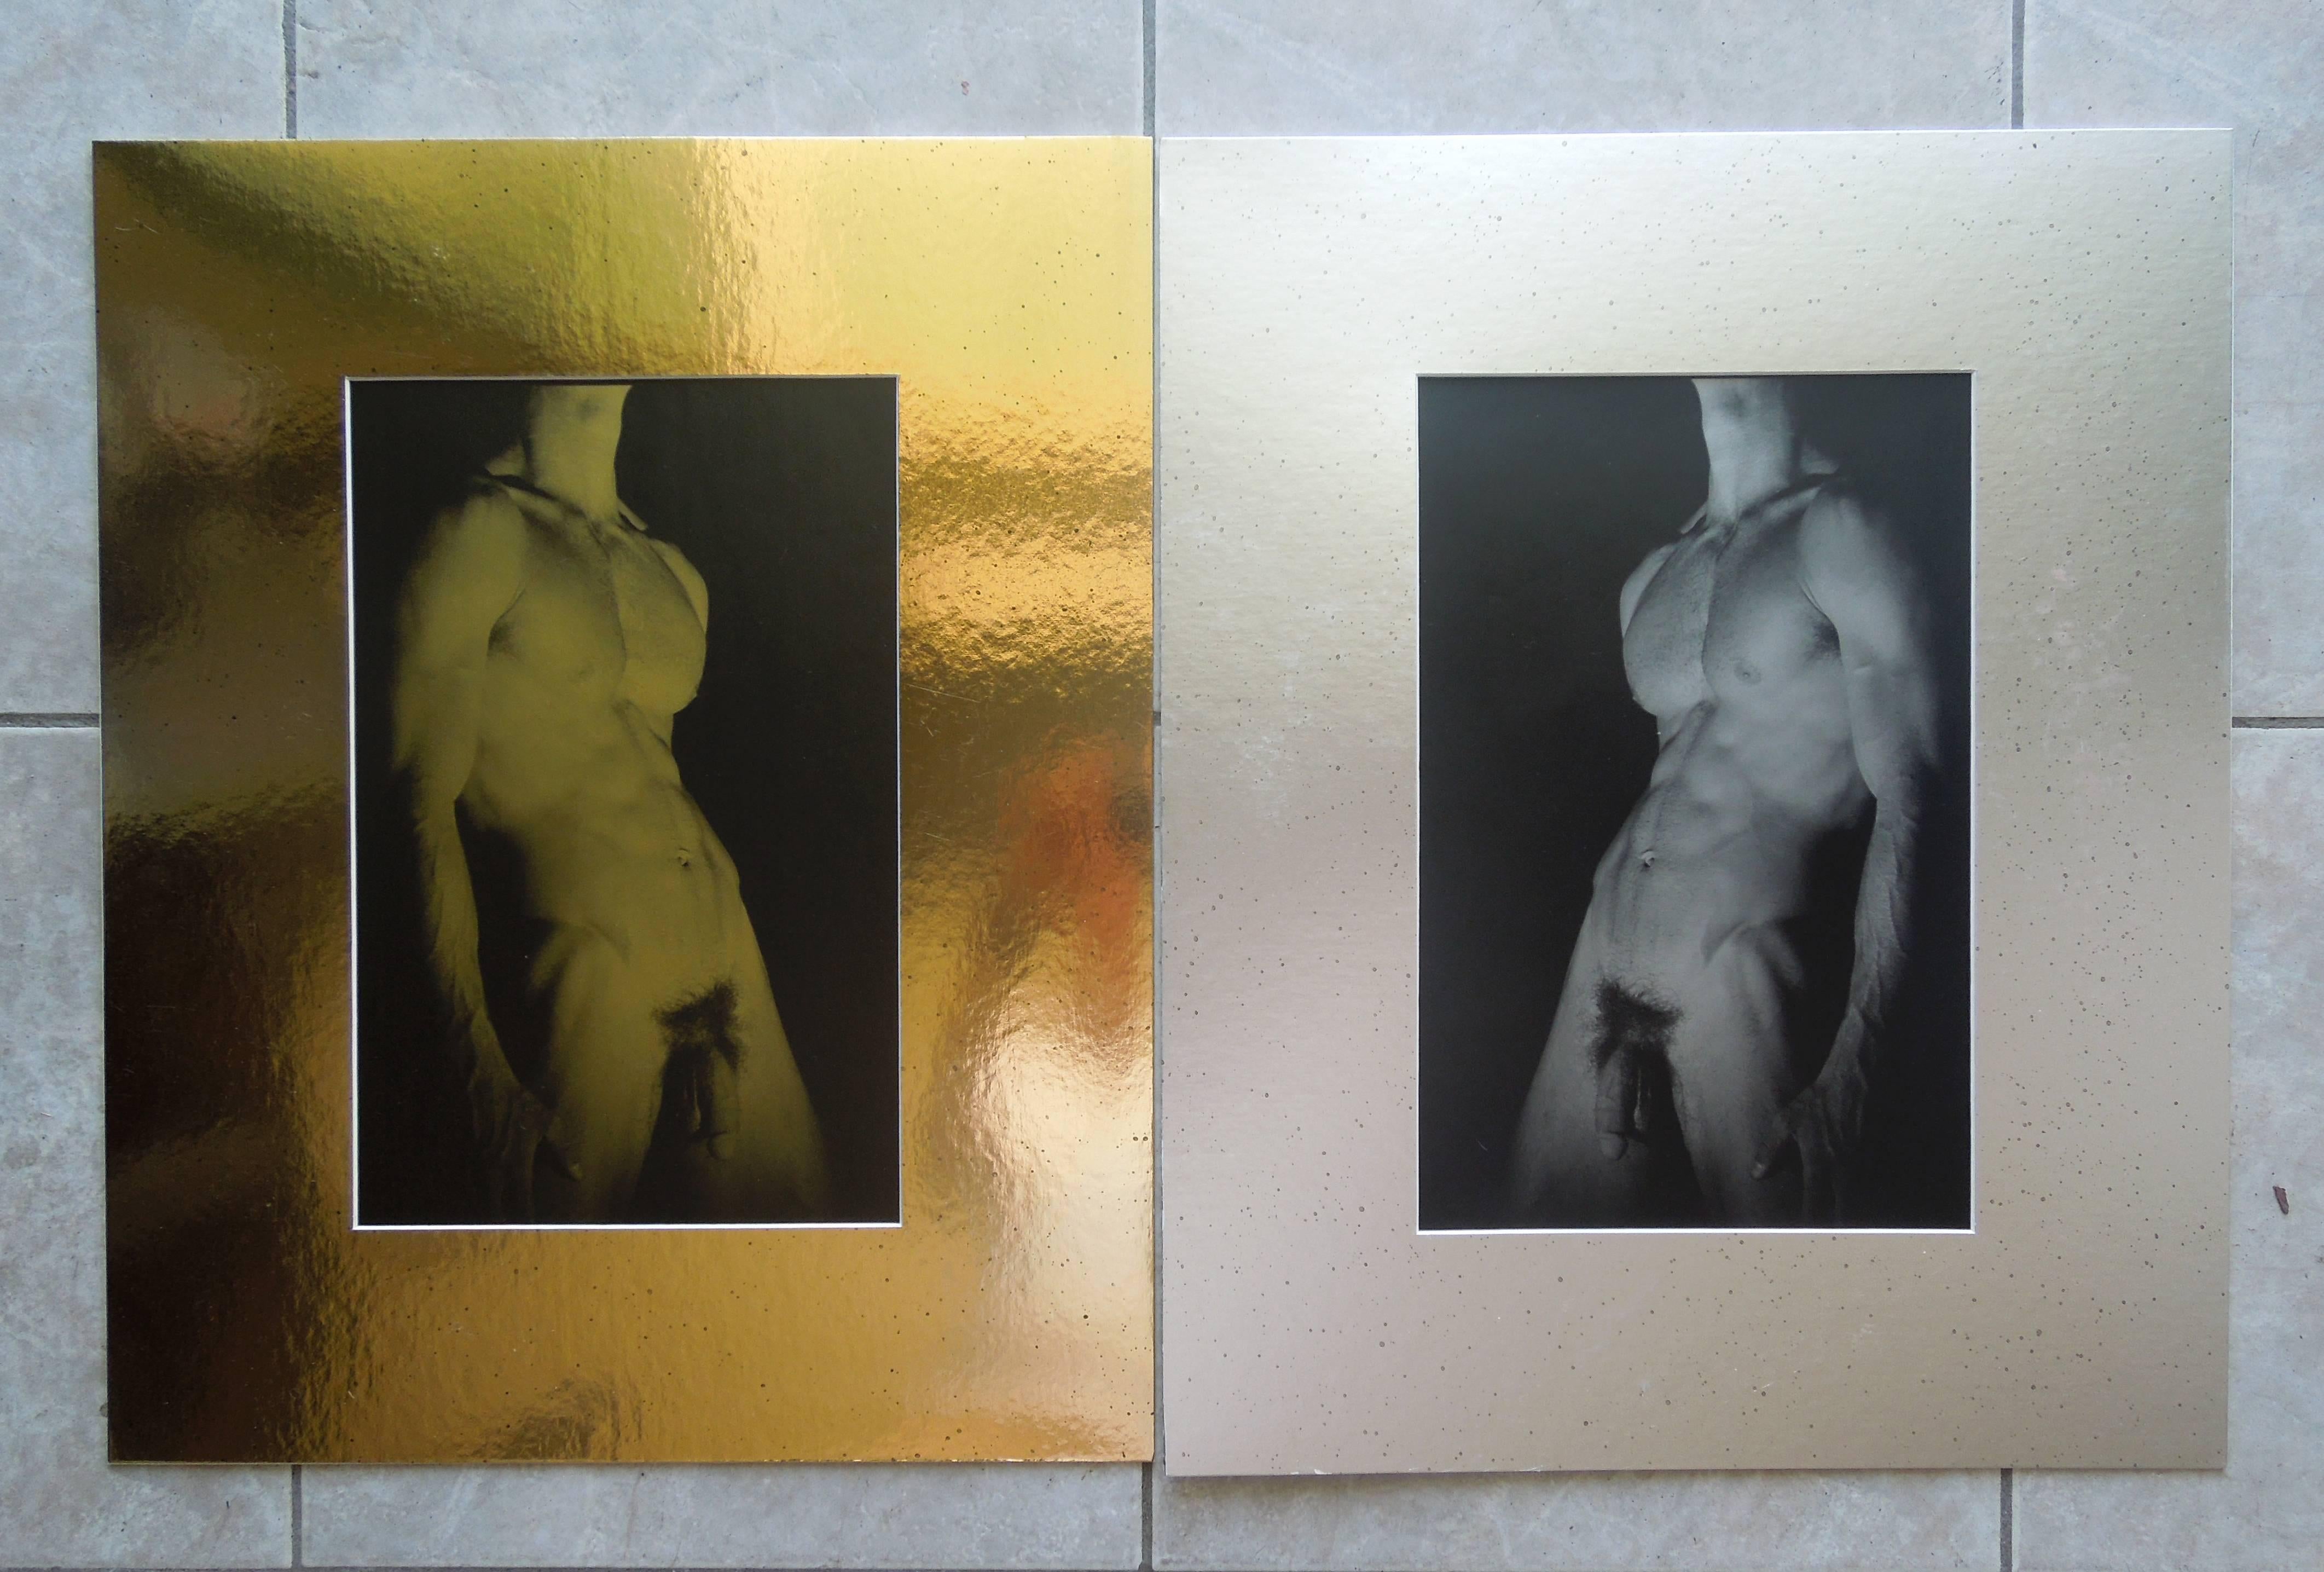 Other Pair of Gold & Silver Male Nude Original Photographs By George Machado